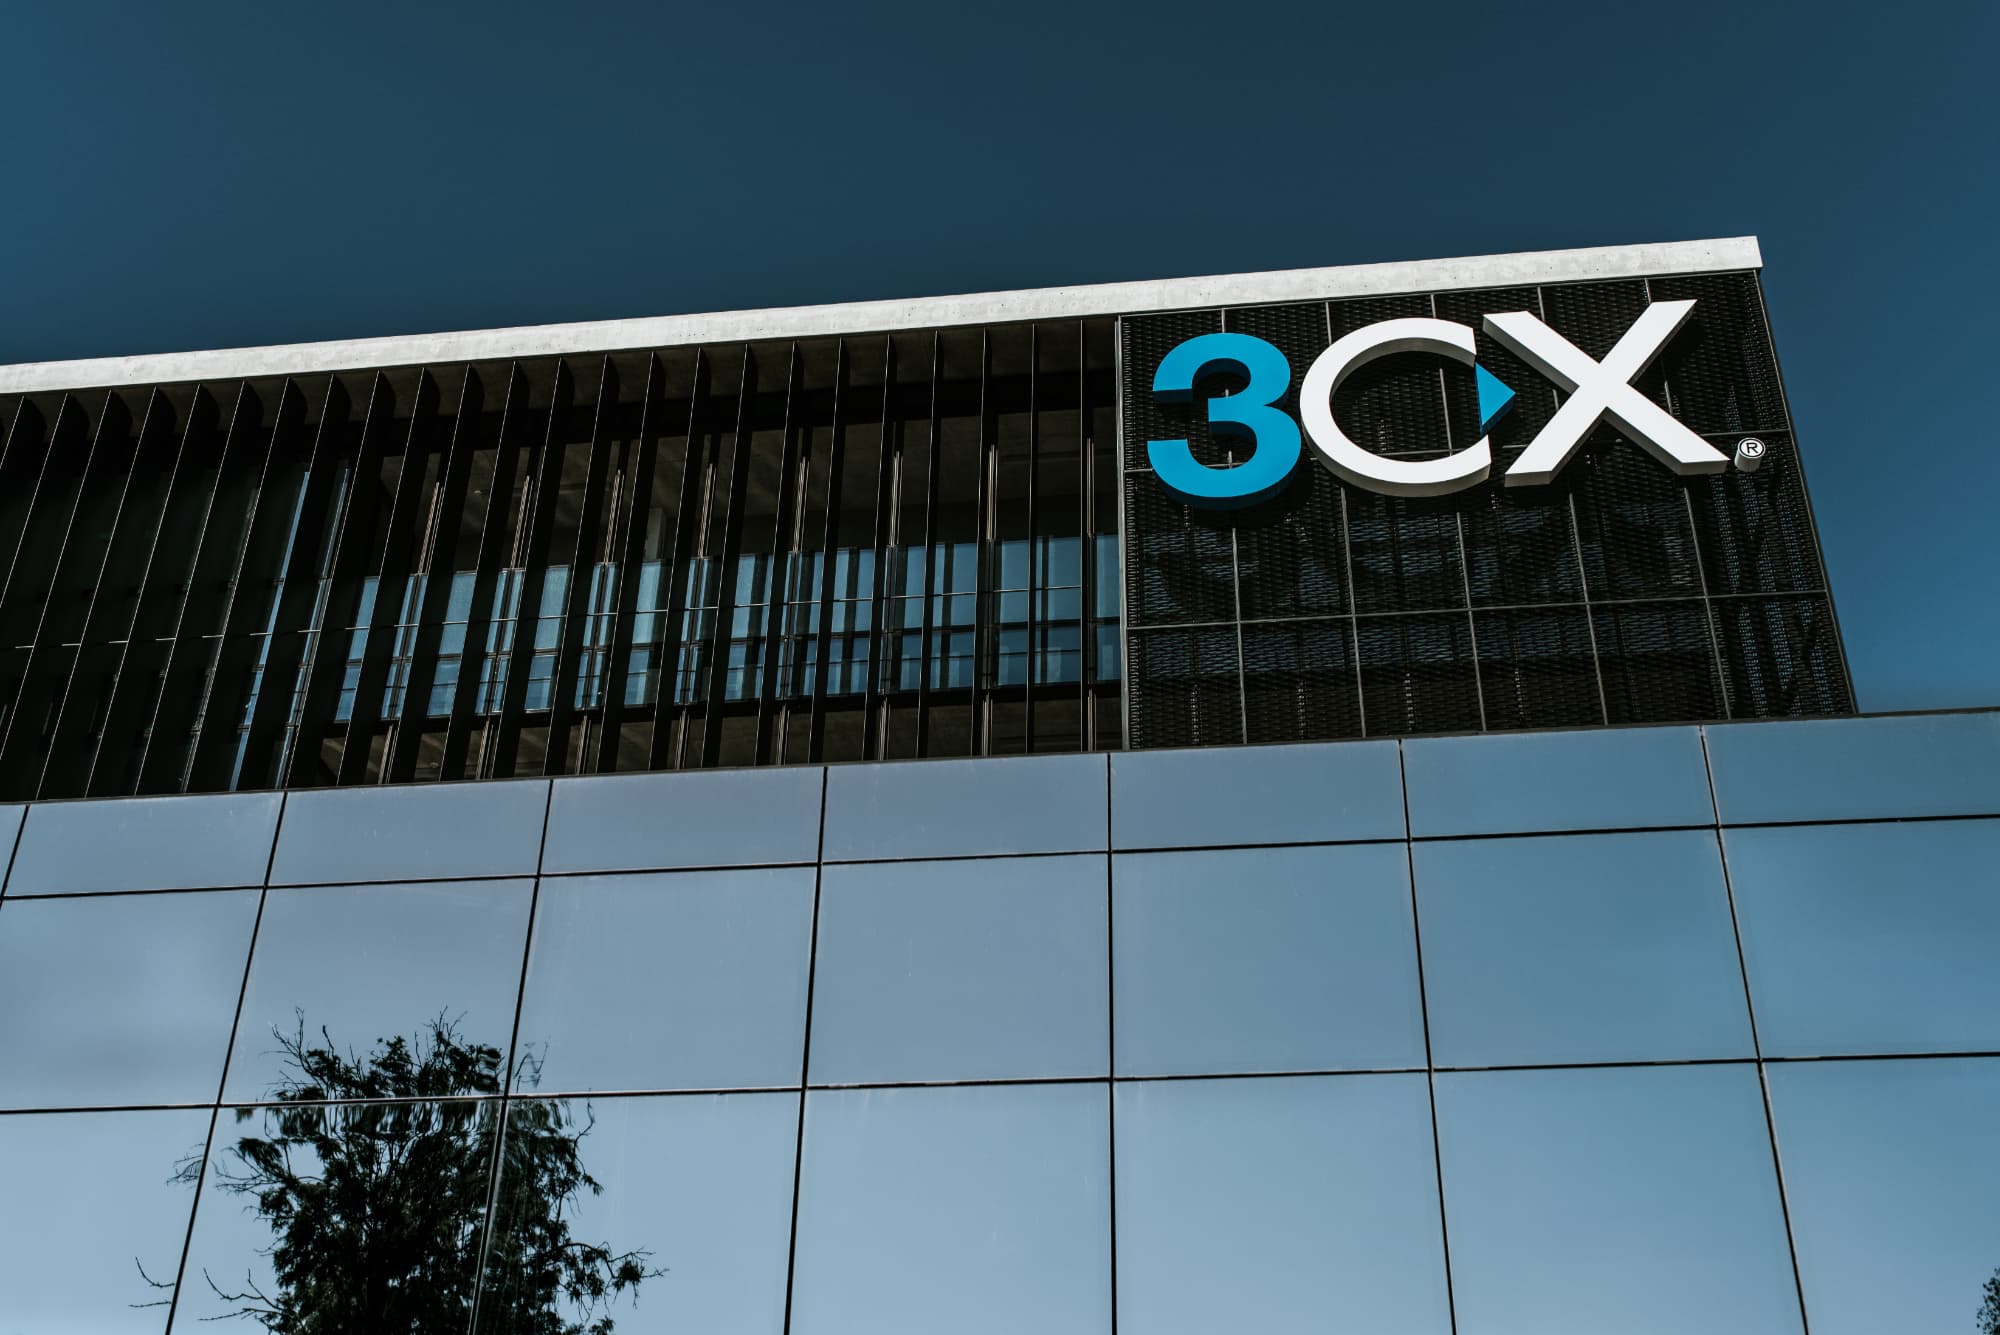 01._3CX_Building_with_logo.jpg